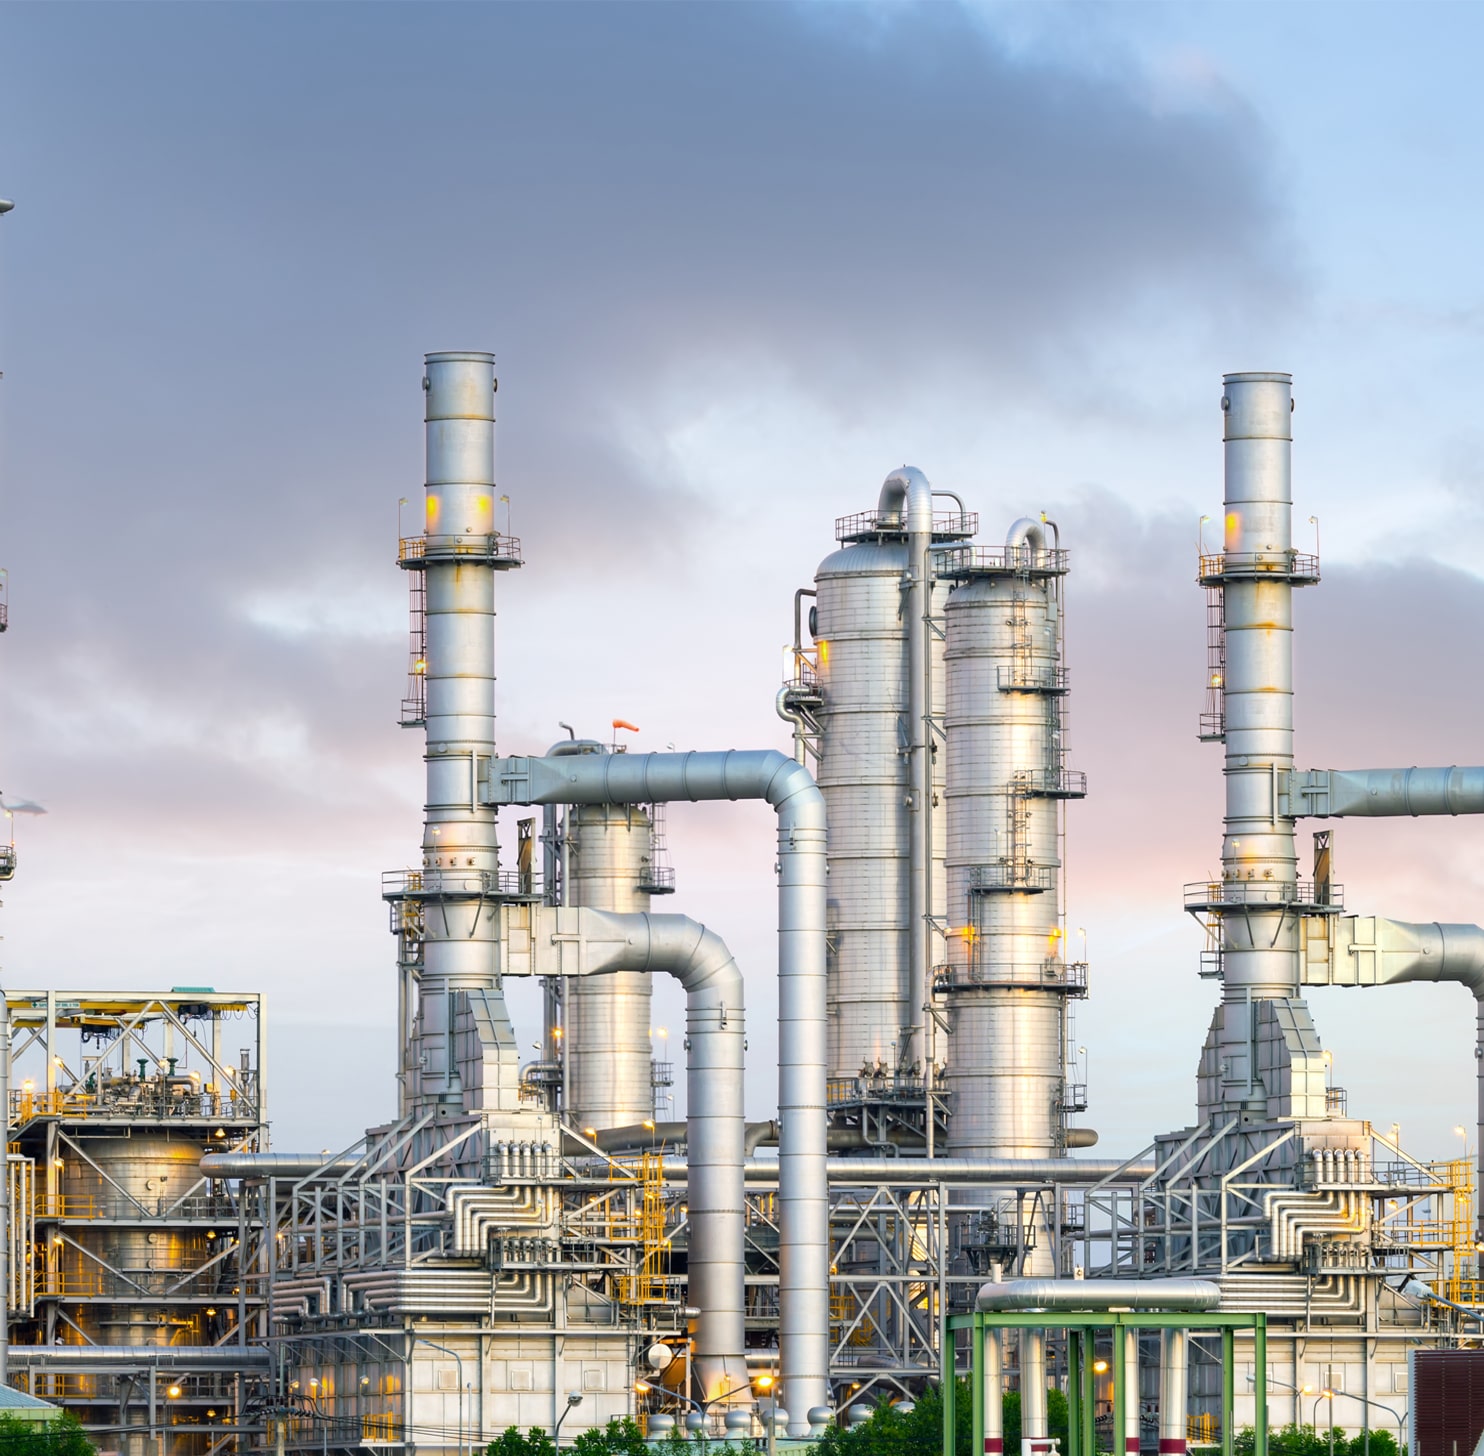 A close-up industrial view of a chemical refinery.